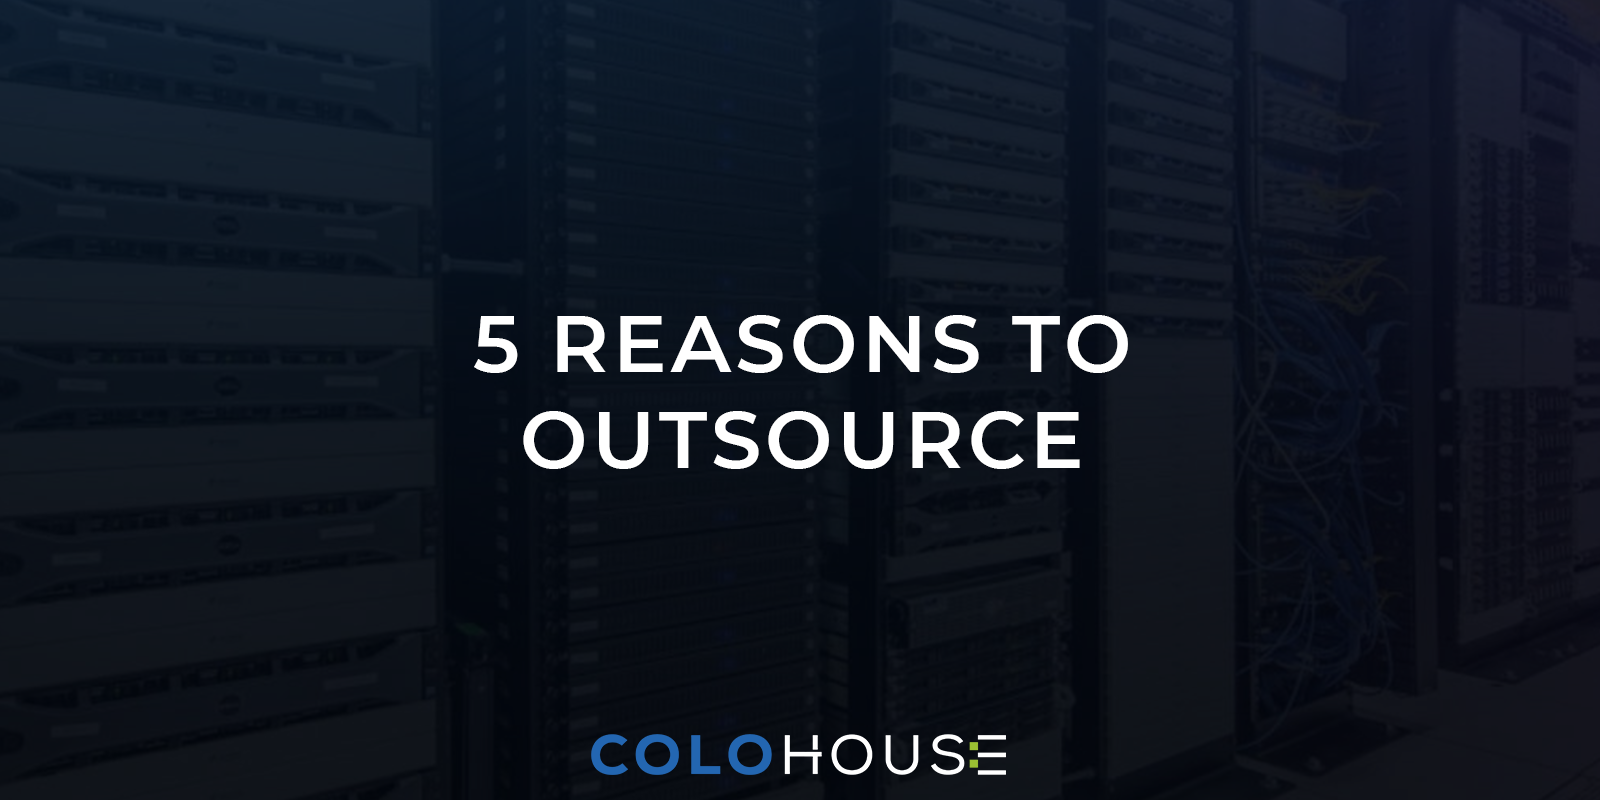 What are the benefits of outsourcing your IT Infrastructure?